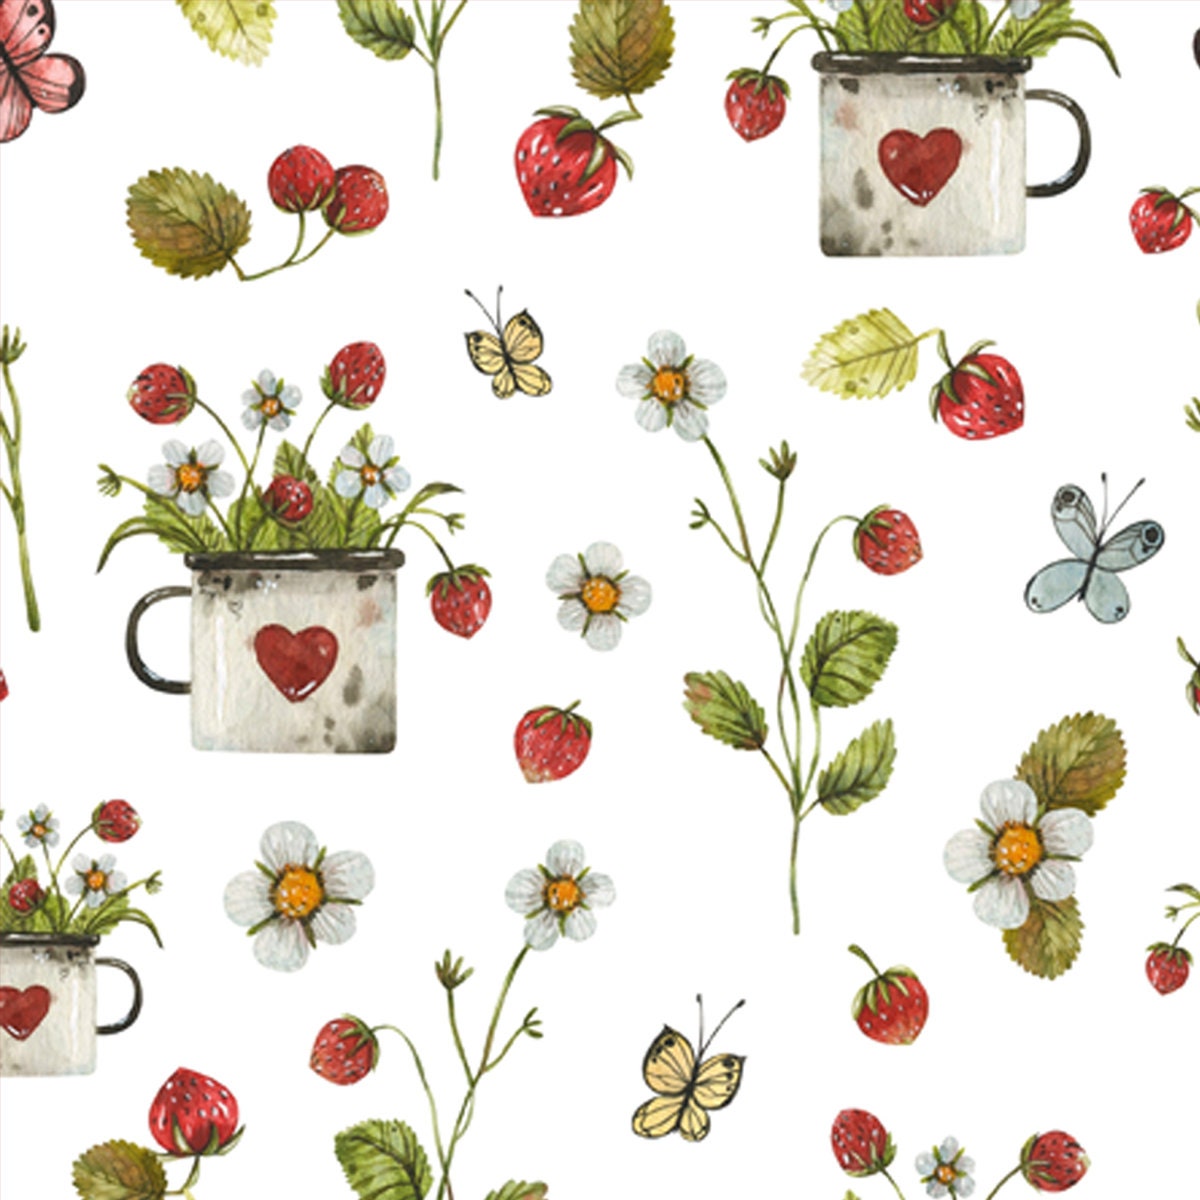 Teacup with Strawberries, Berries, Sprout, Herbs and Forest Flowers Wallpaper Kitchen Mural